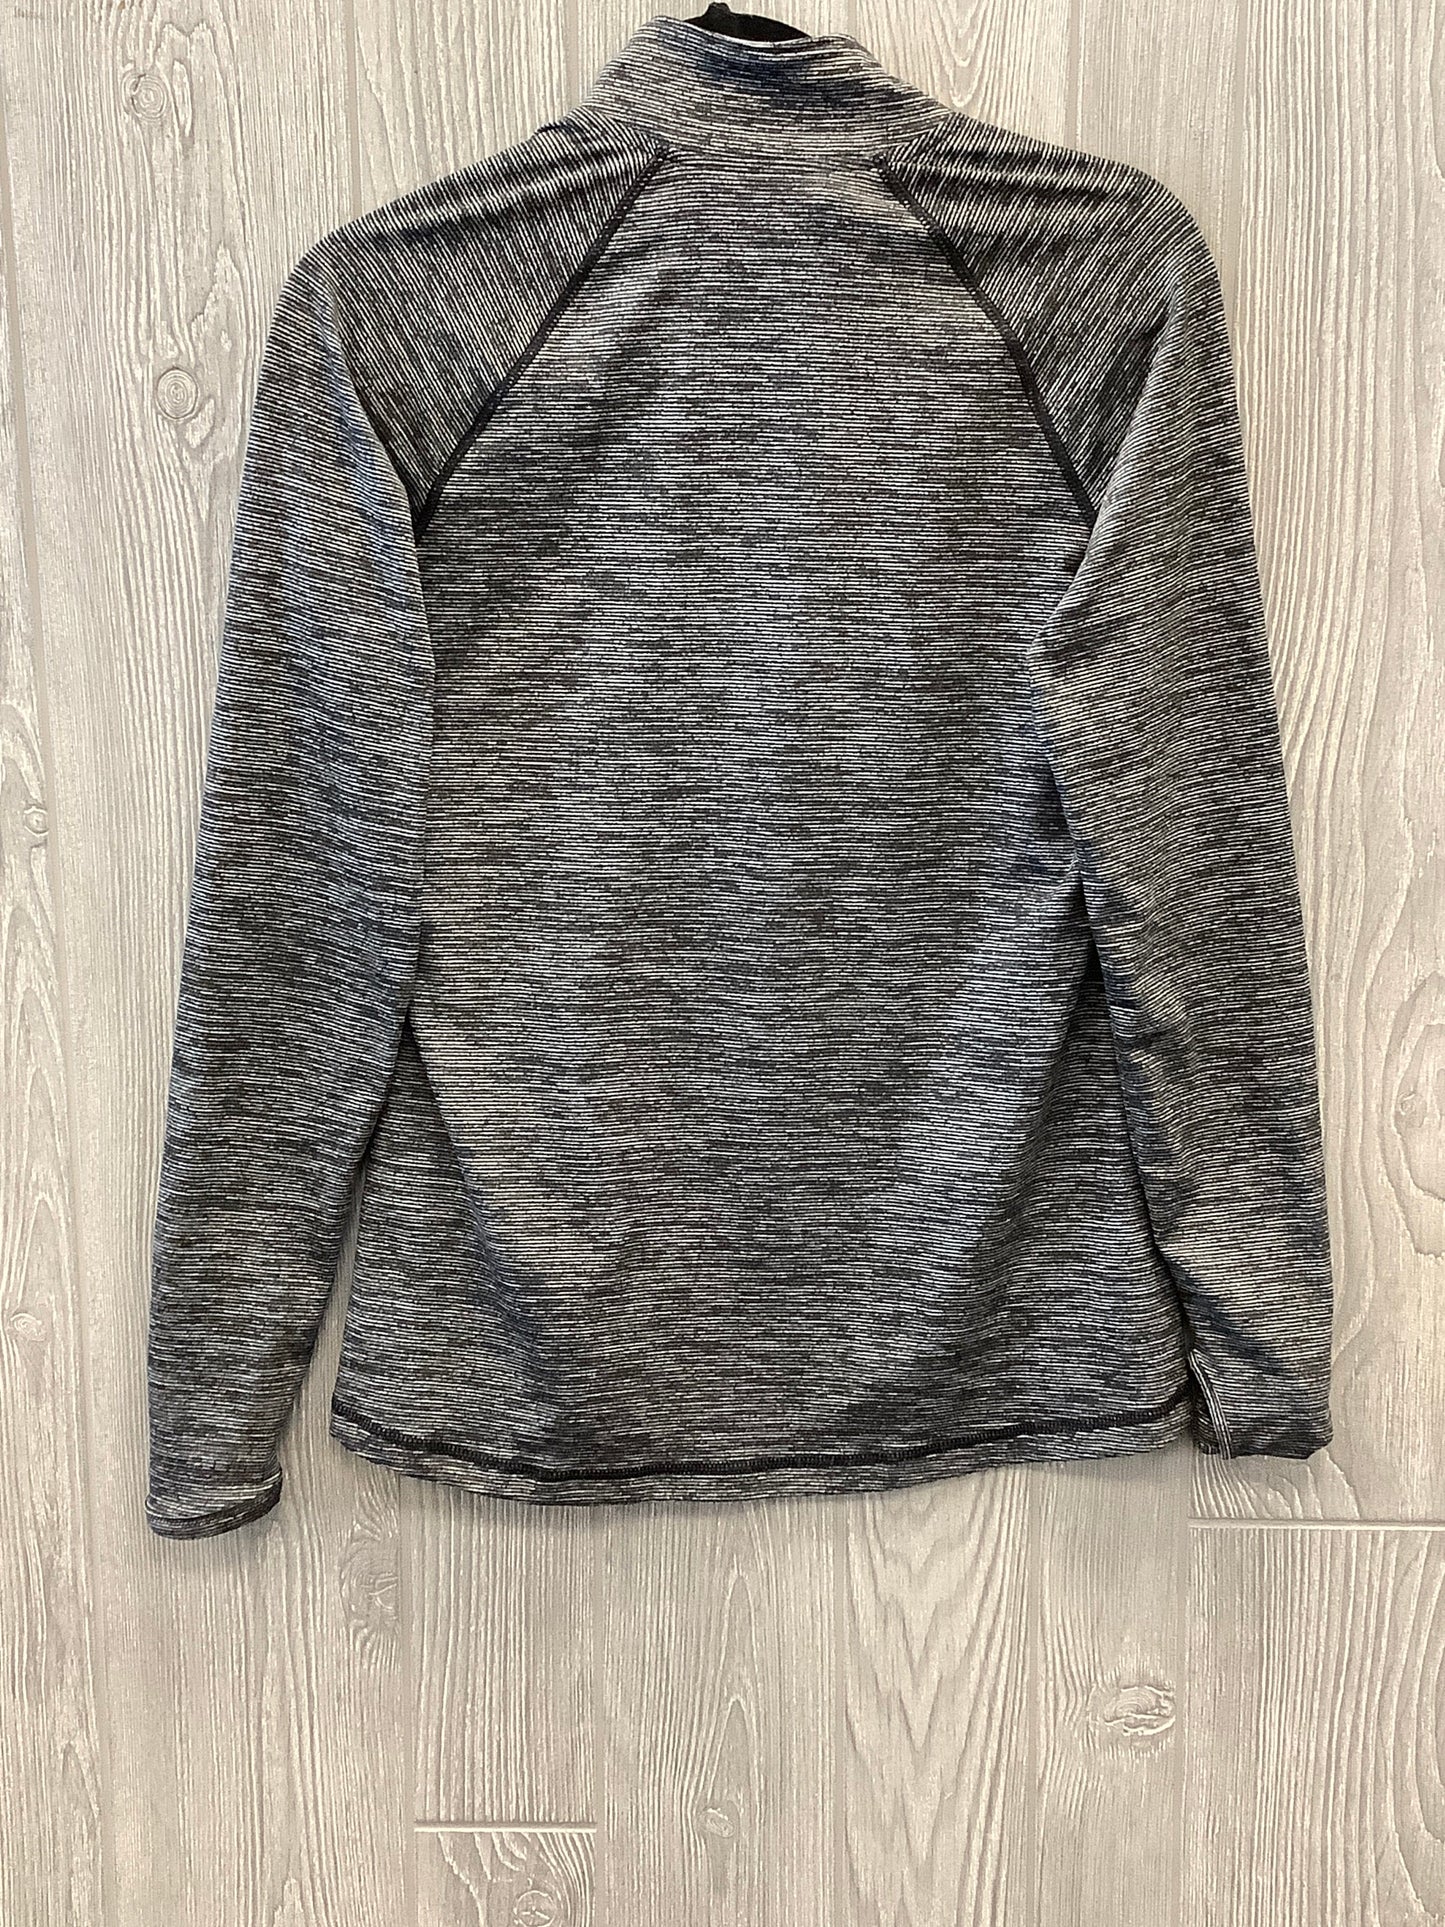 Athletic Top Long Sleeve Collar By Old Navy  Size: S